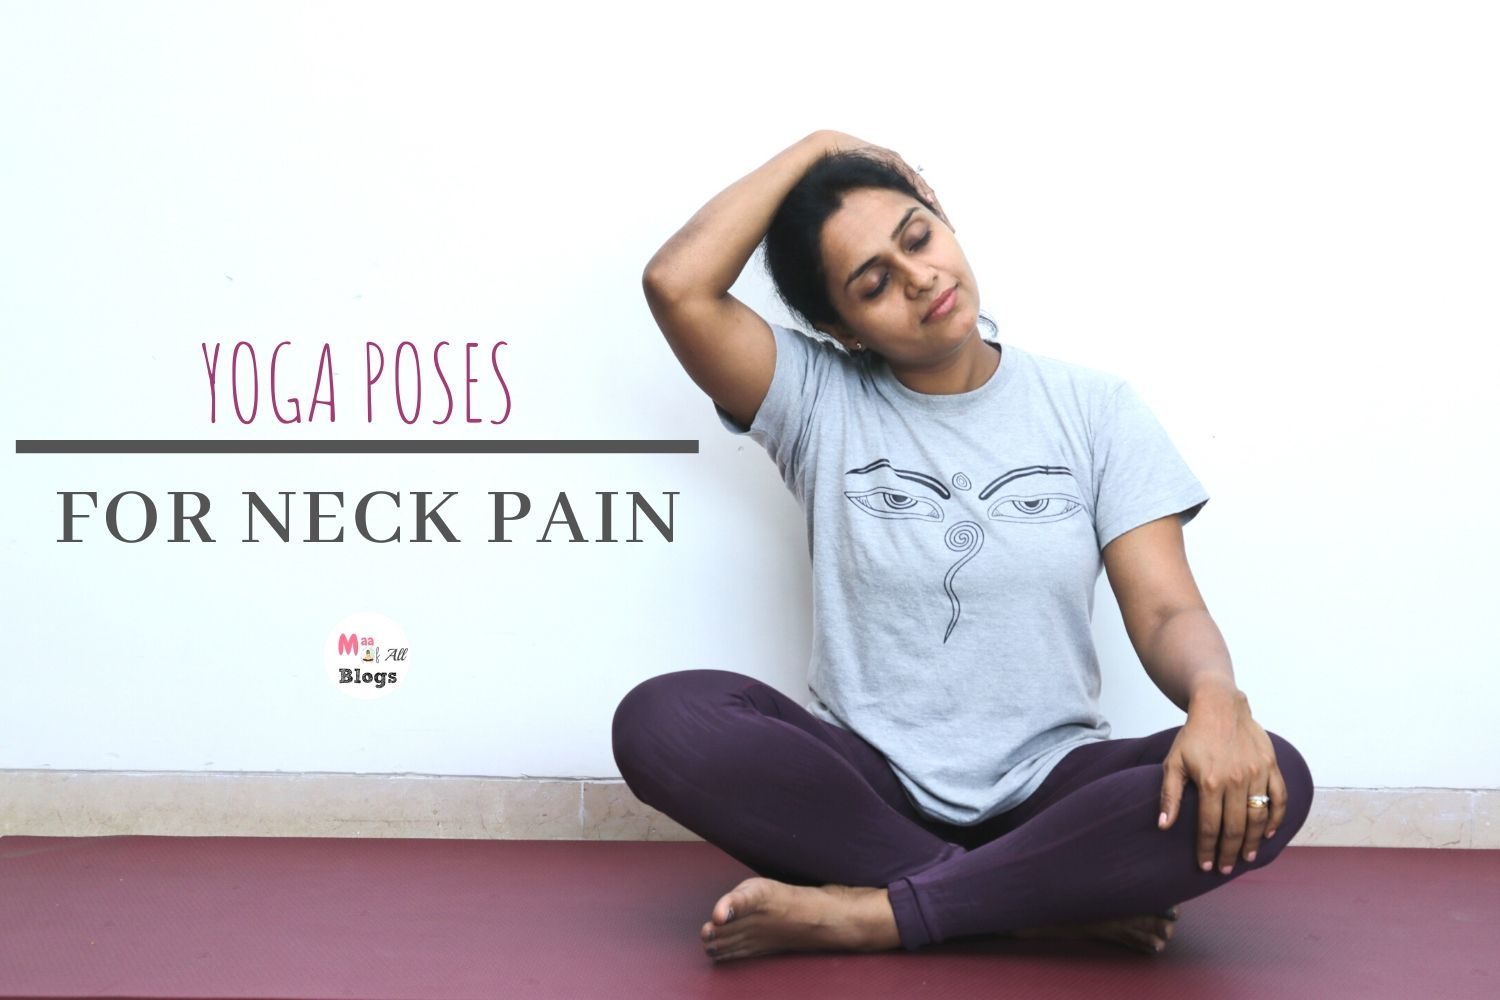 YOGA POSES FOR NECK PAIN